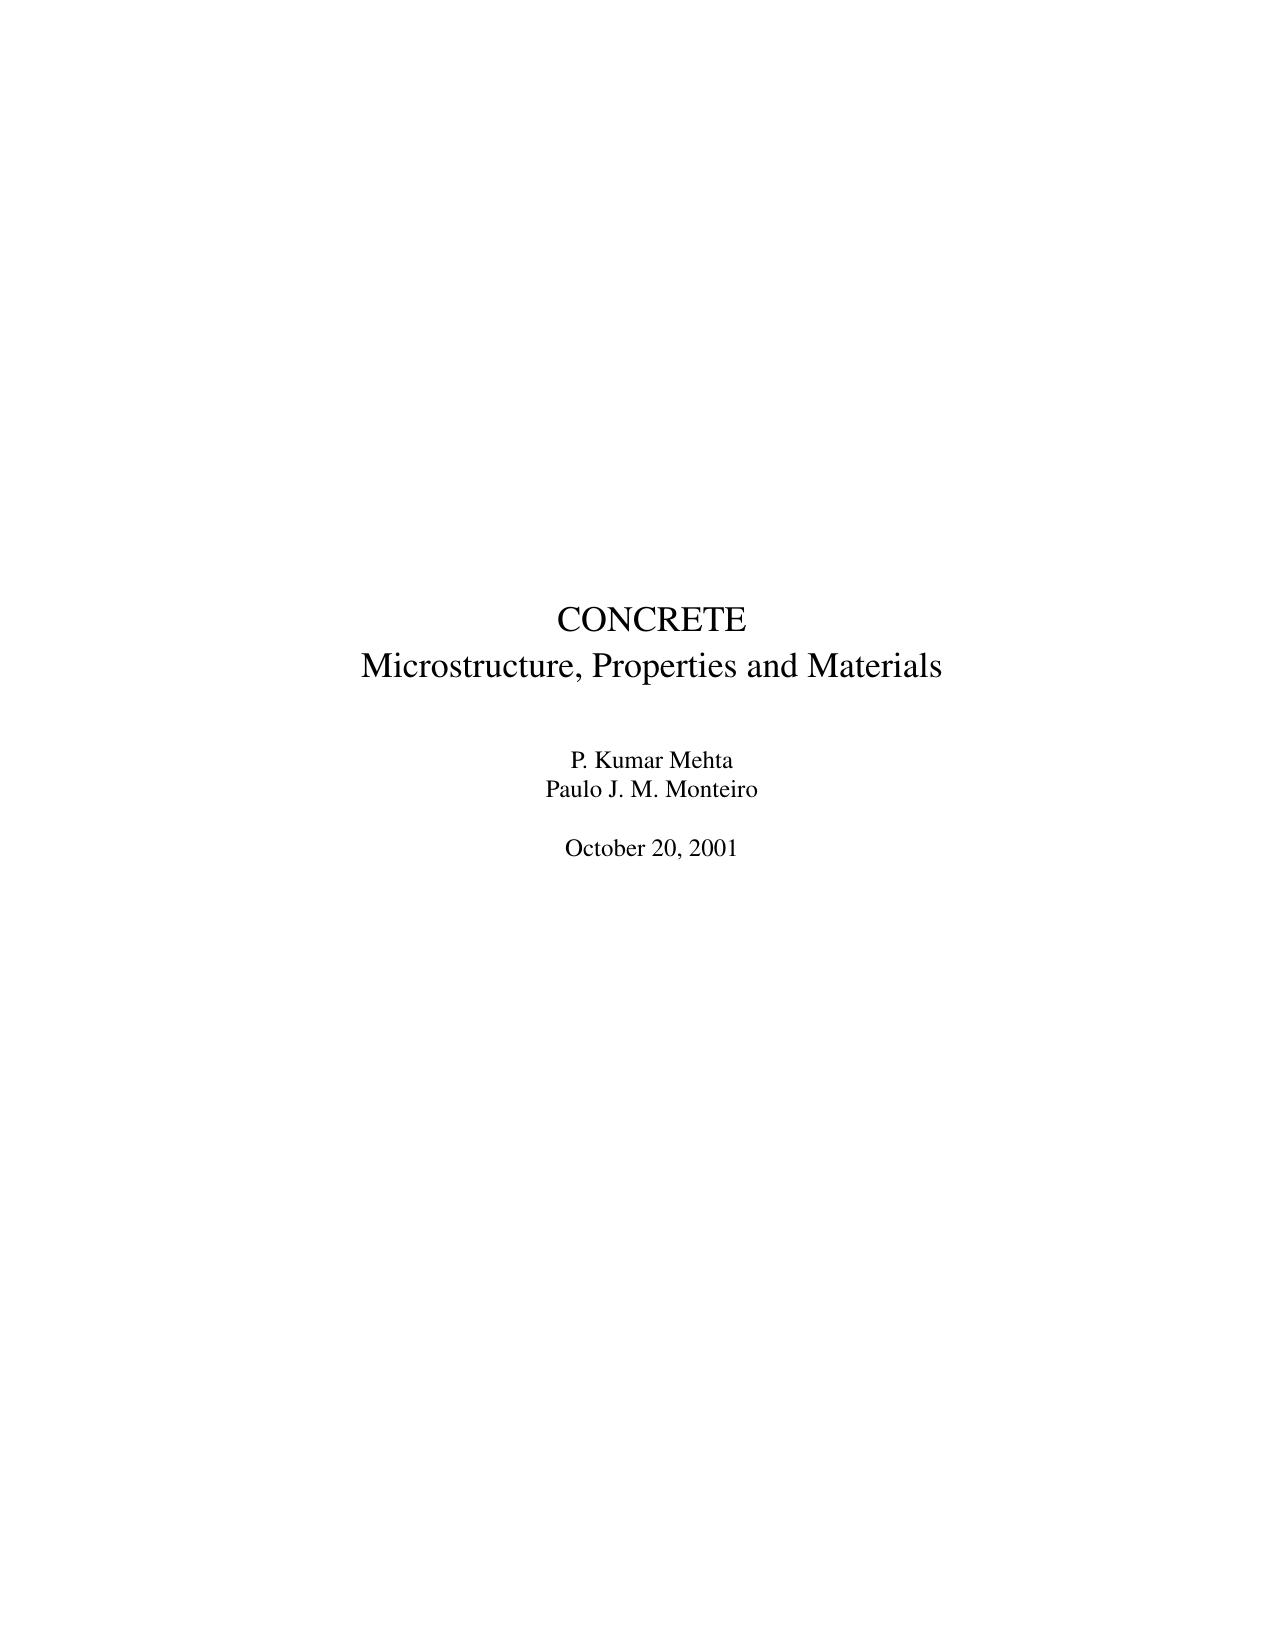 Concrete, Microstructure, Properties and Materials